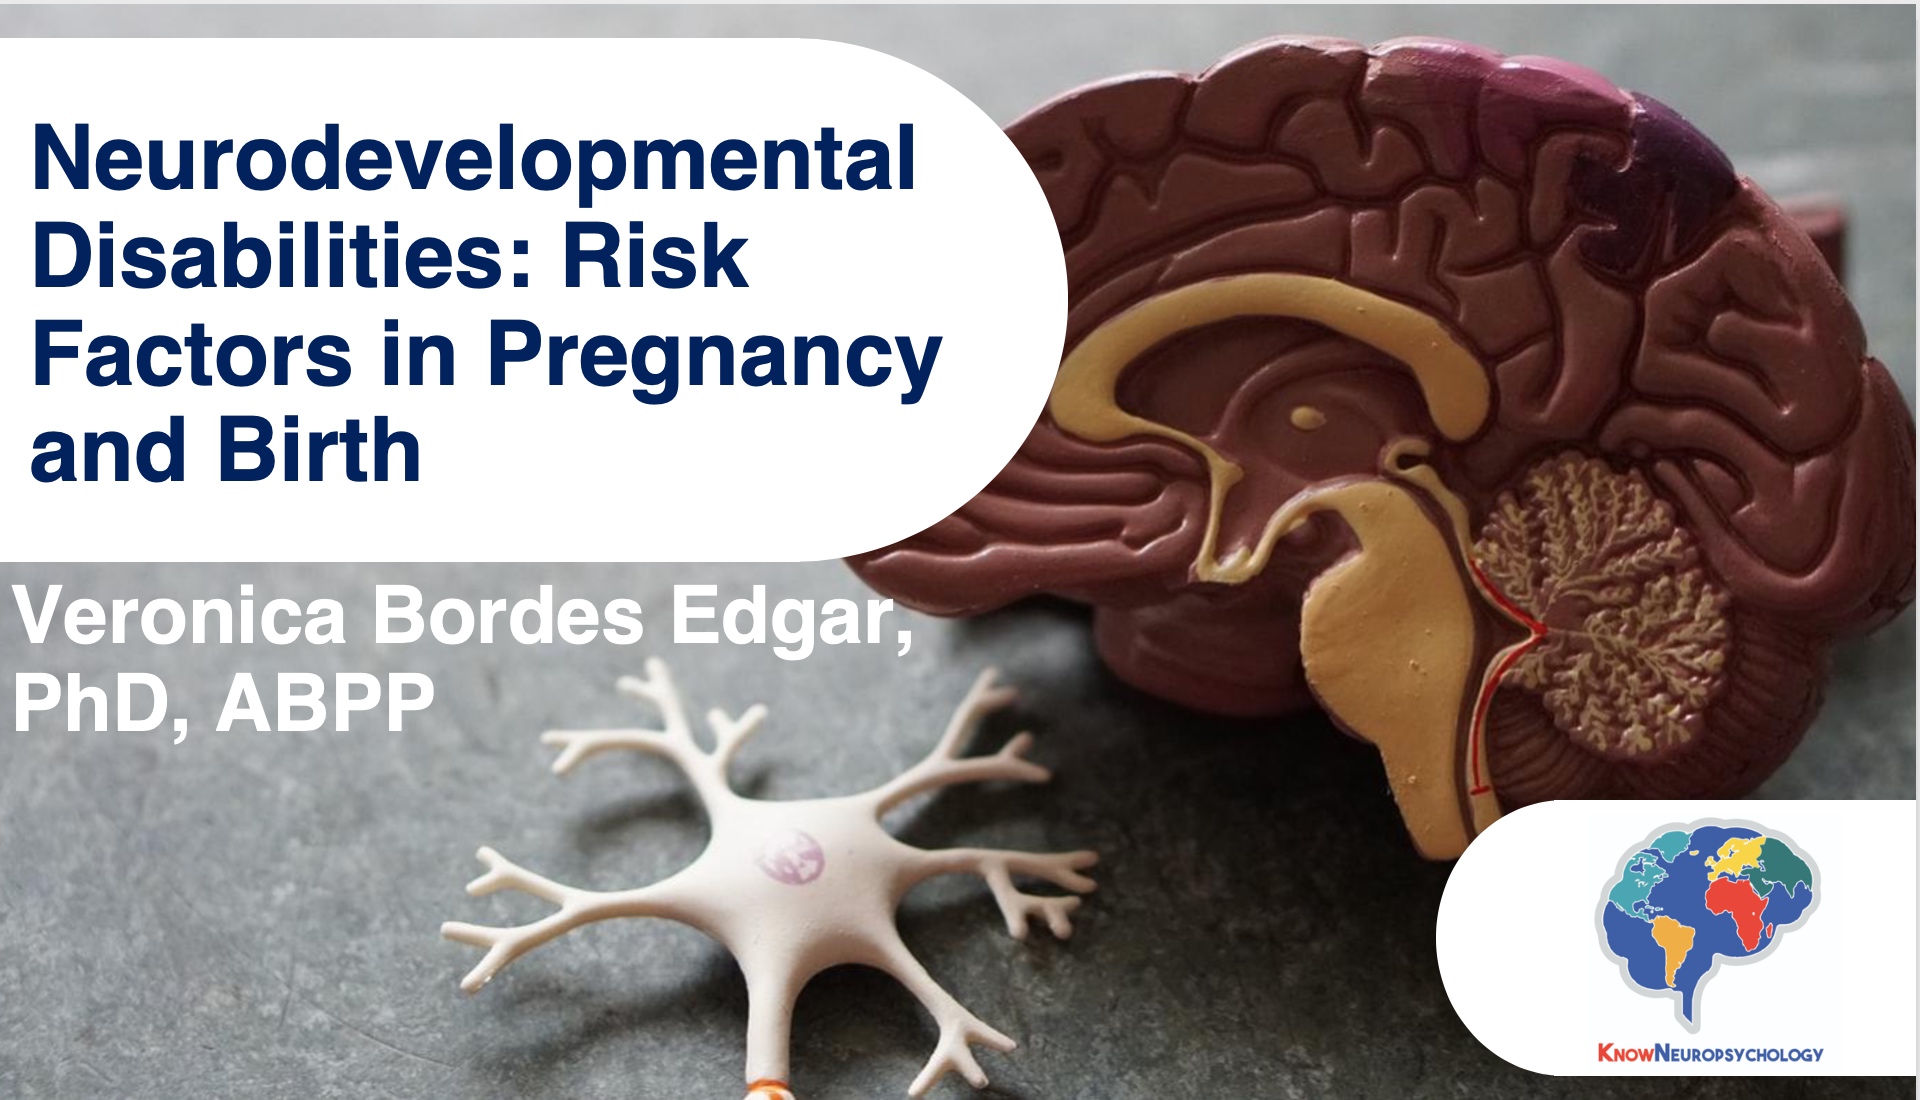 Neurodevelopmental disabilities - risk factors in pregnancy and birth lecture recording